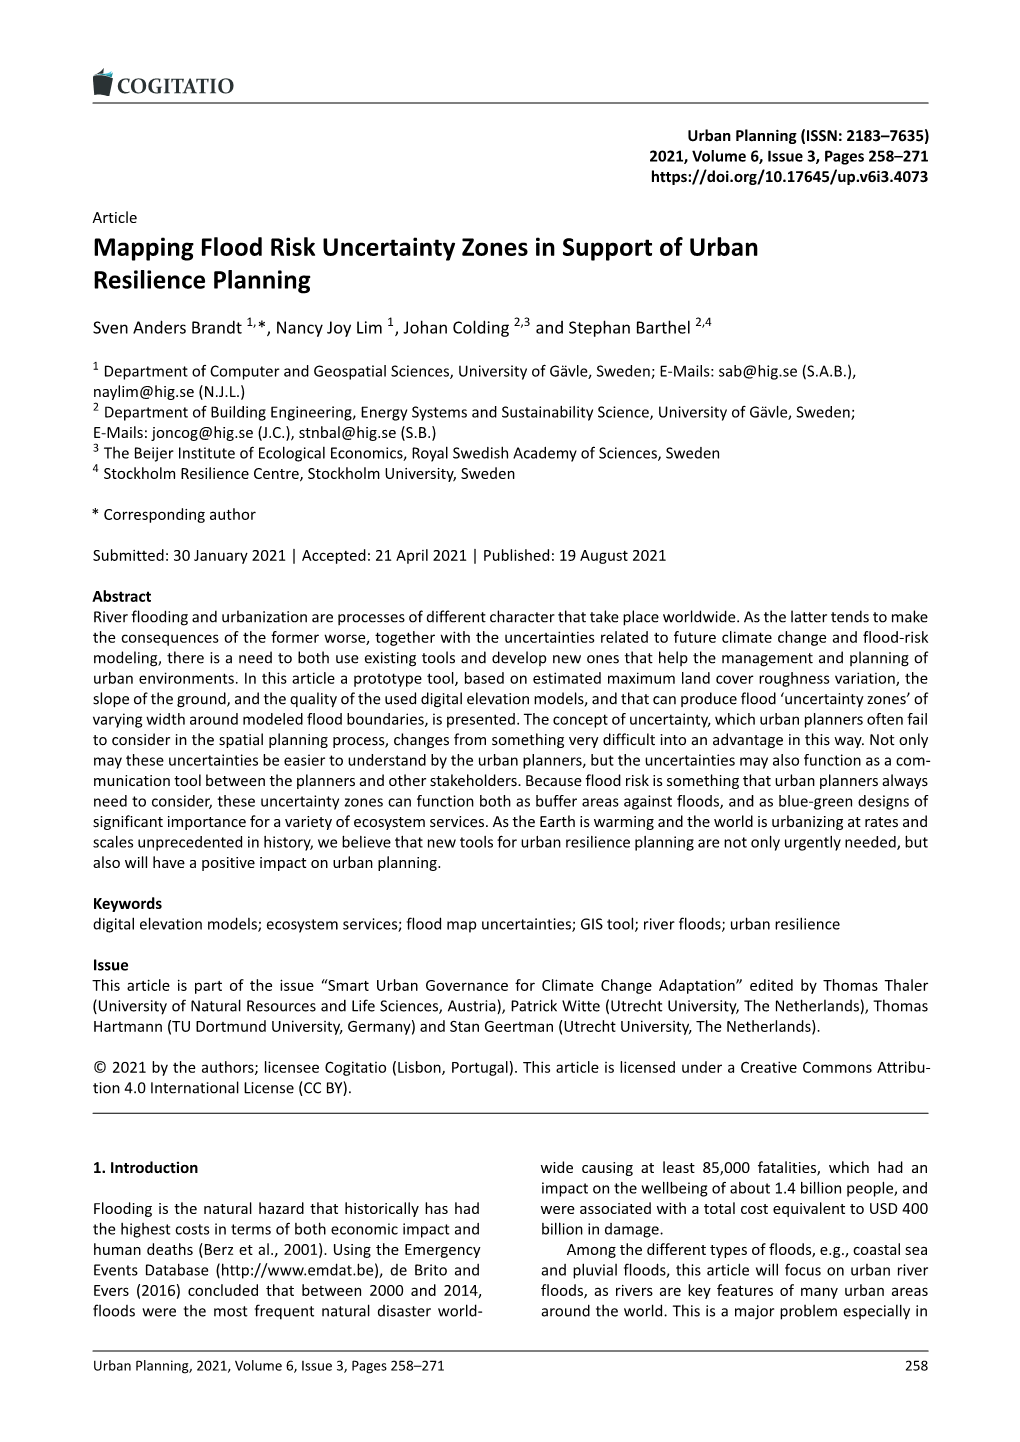 Mapping Flood Risk Uncertainty Zones in Support of Urban Resilience Planning